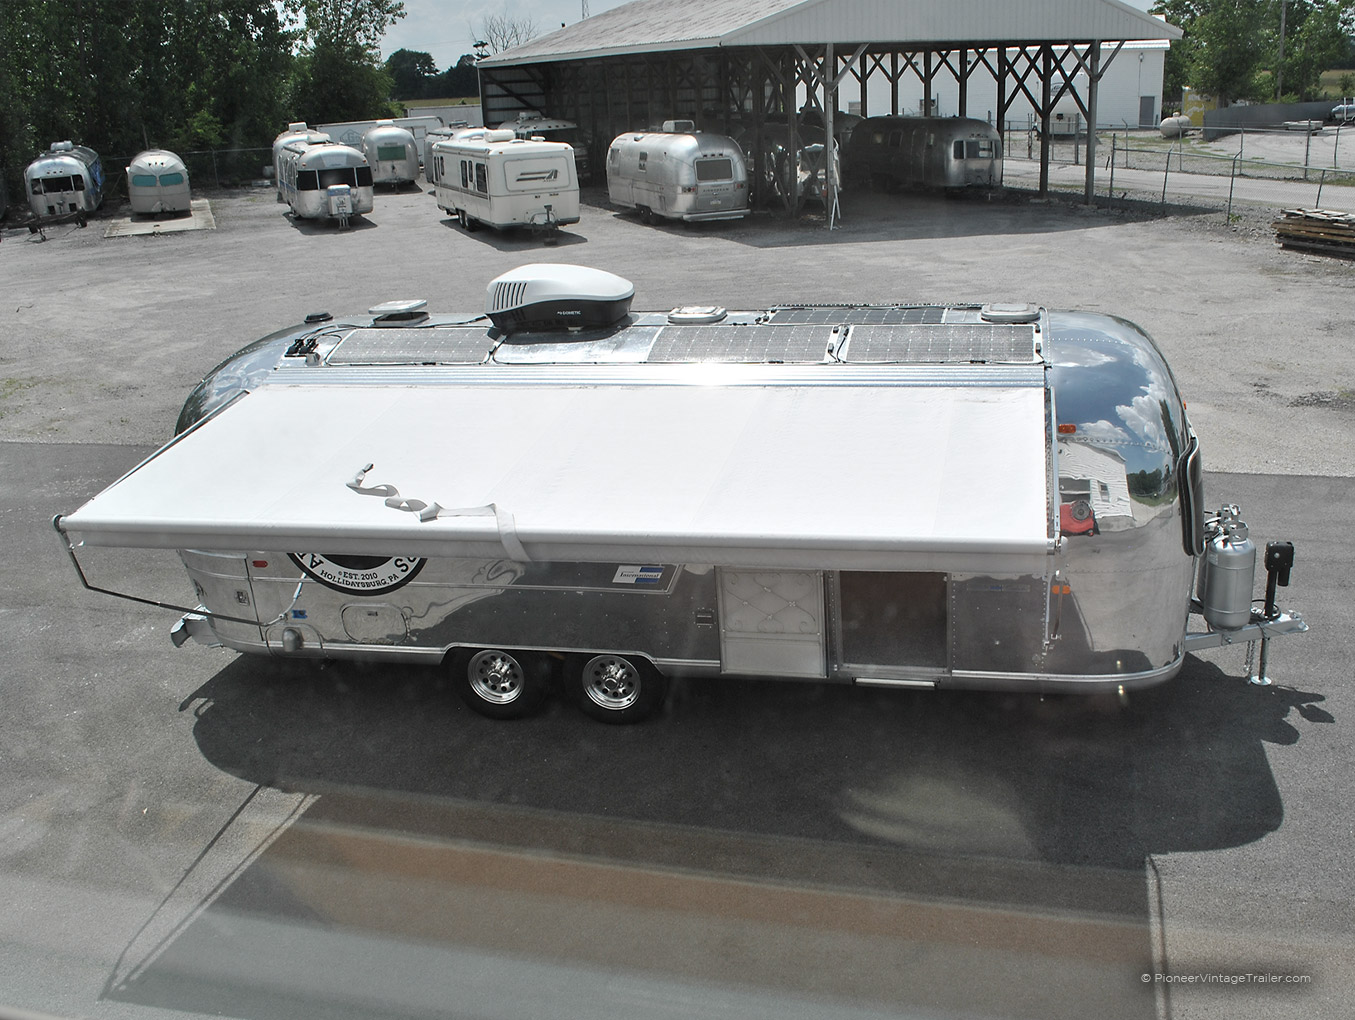 awning on Airstream coffee trailer